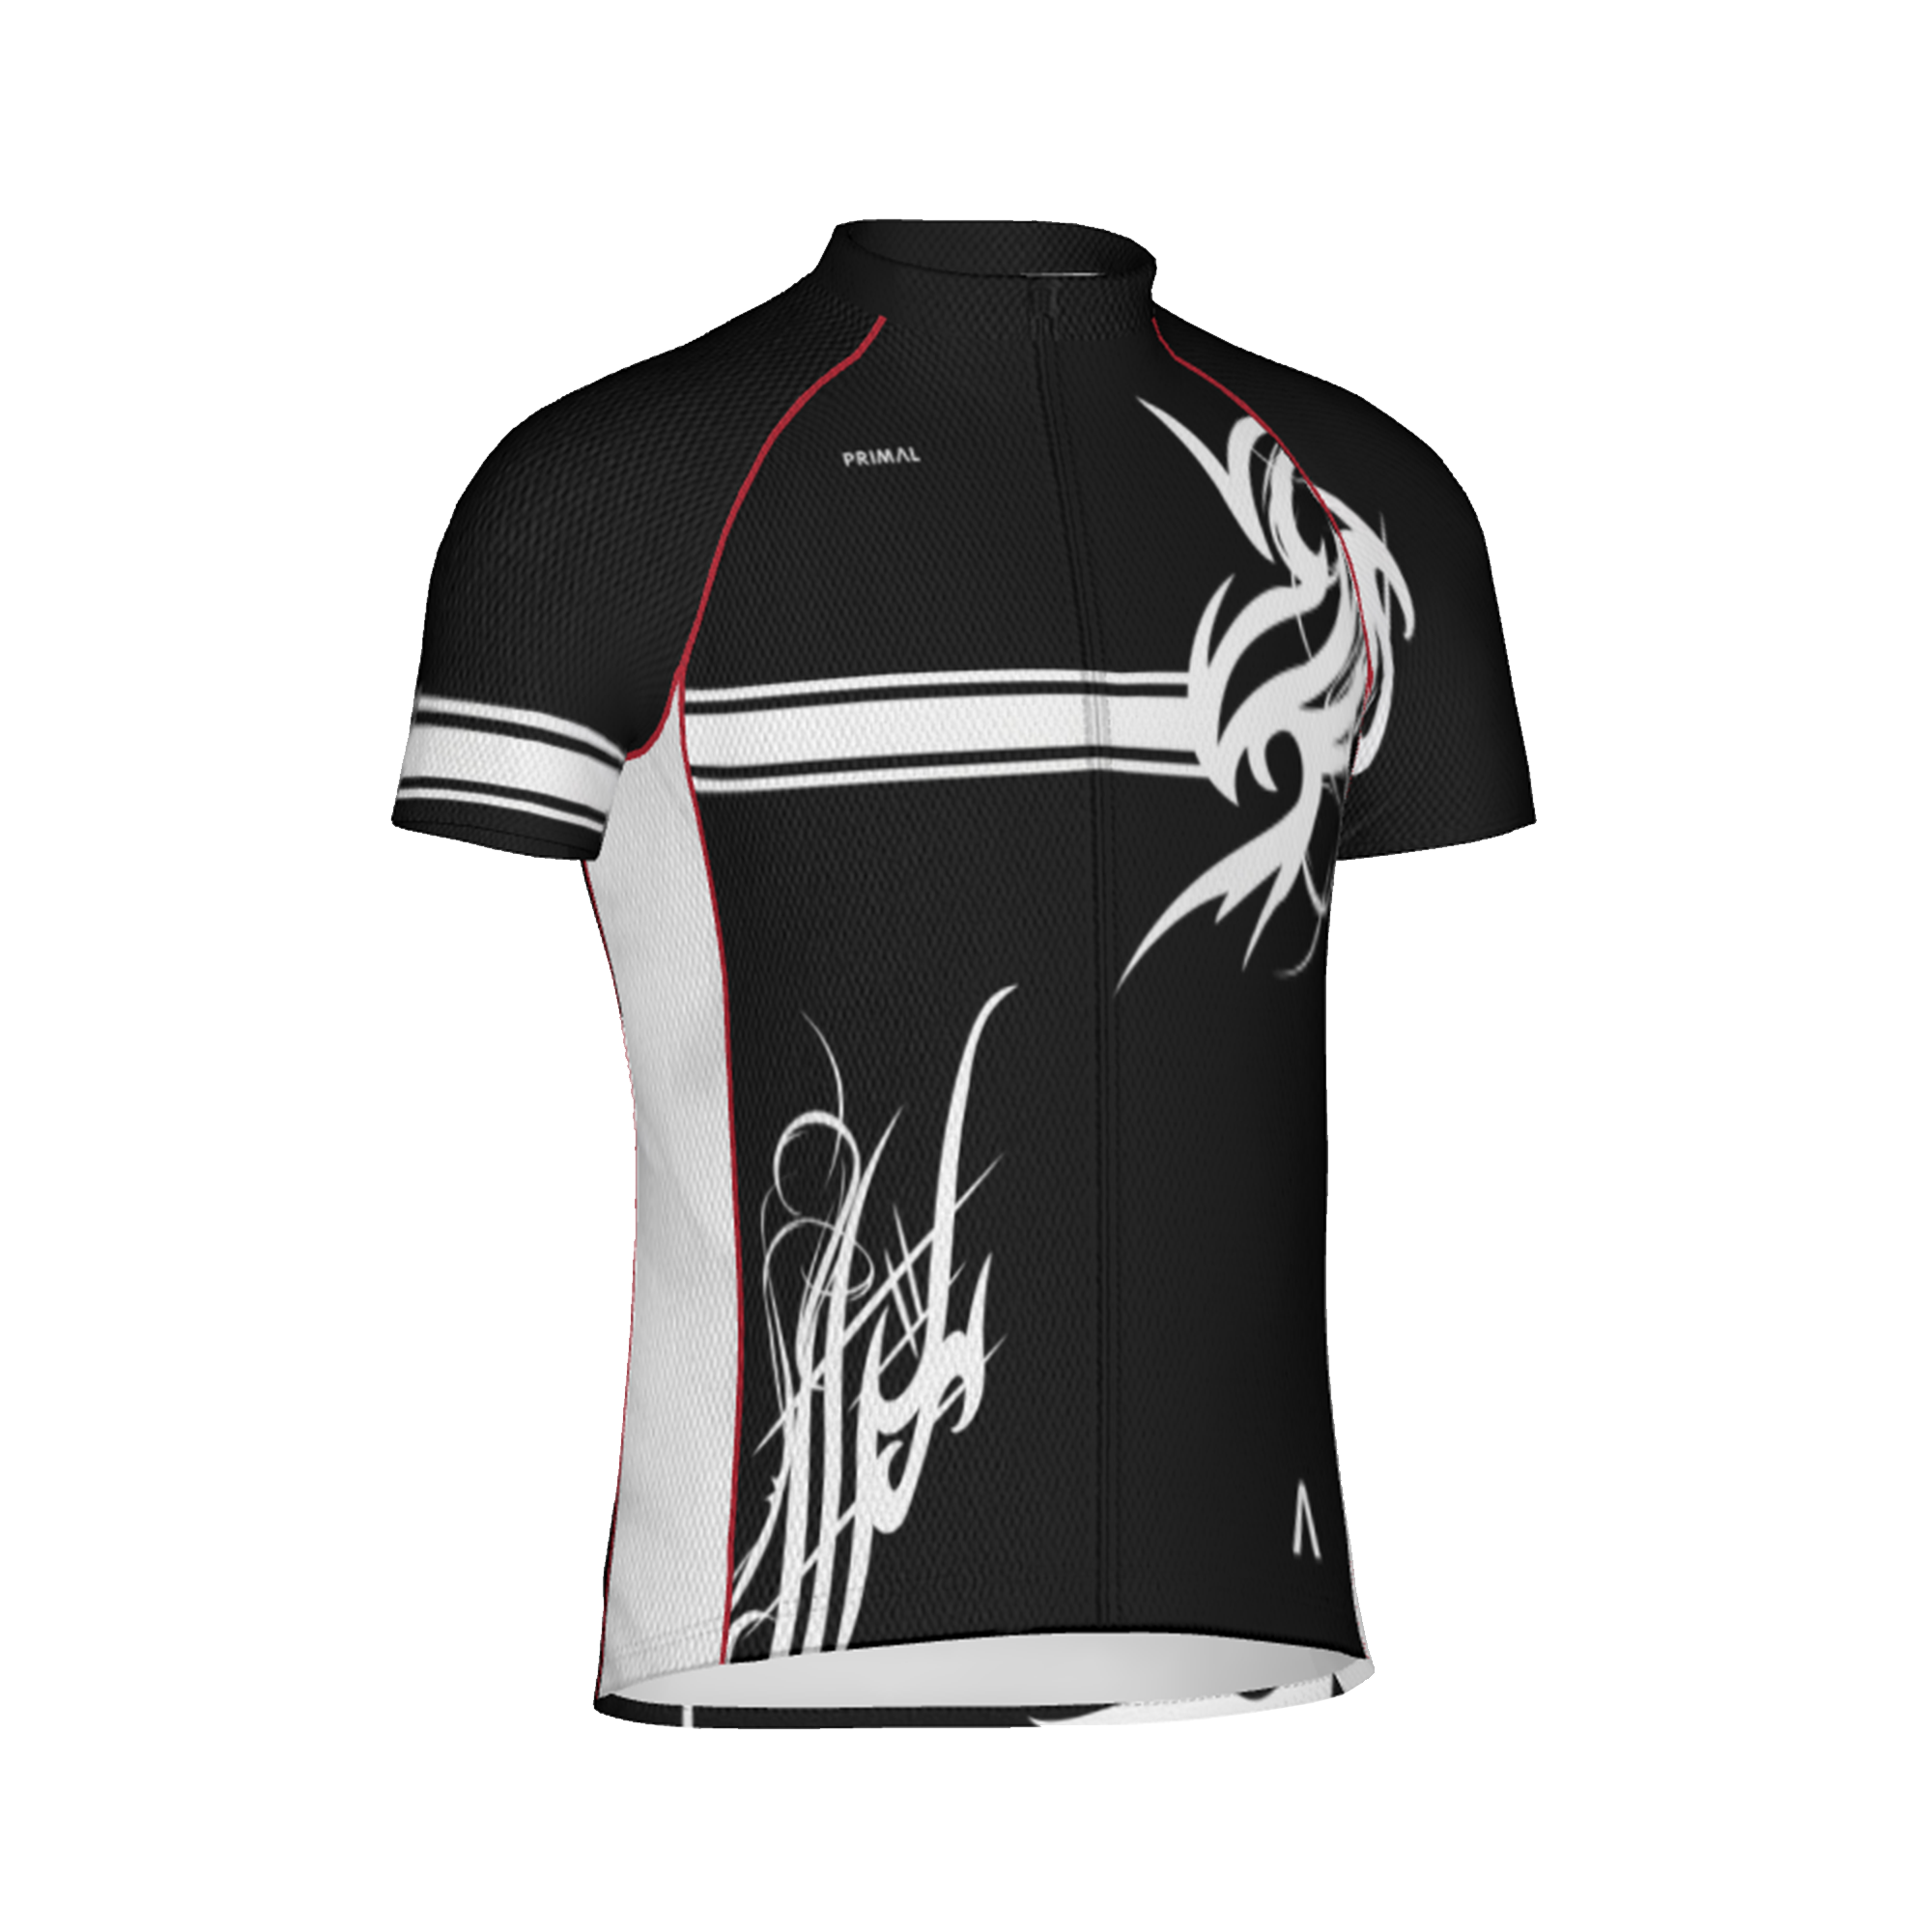 Cycling Jersey png images